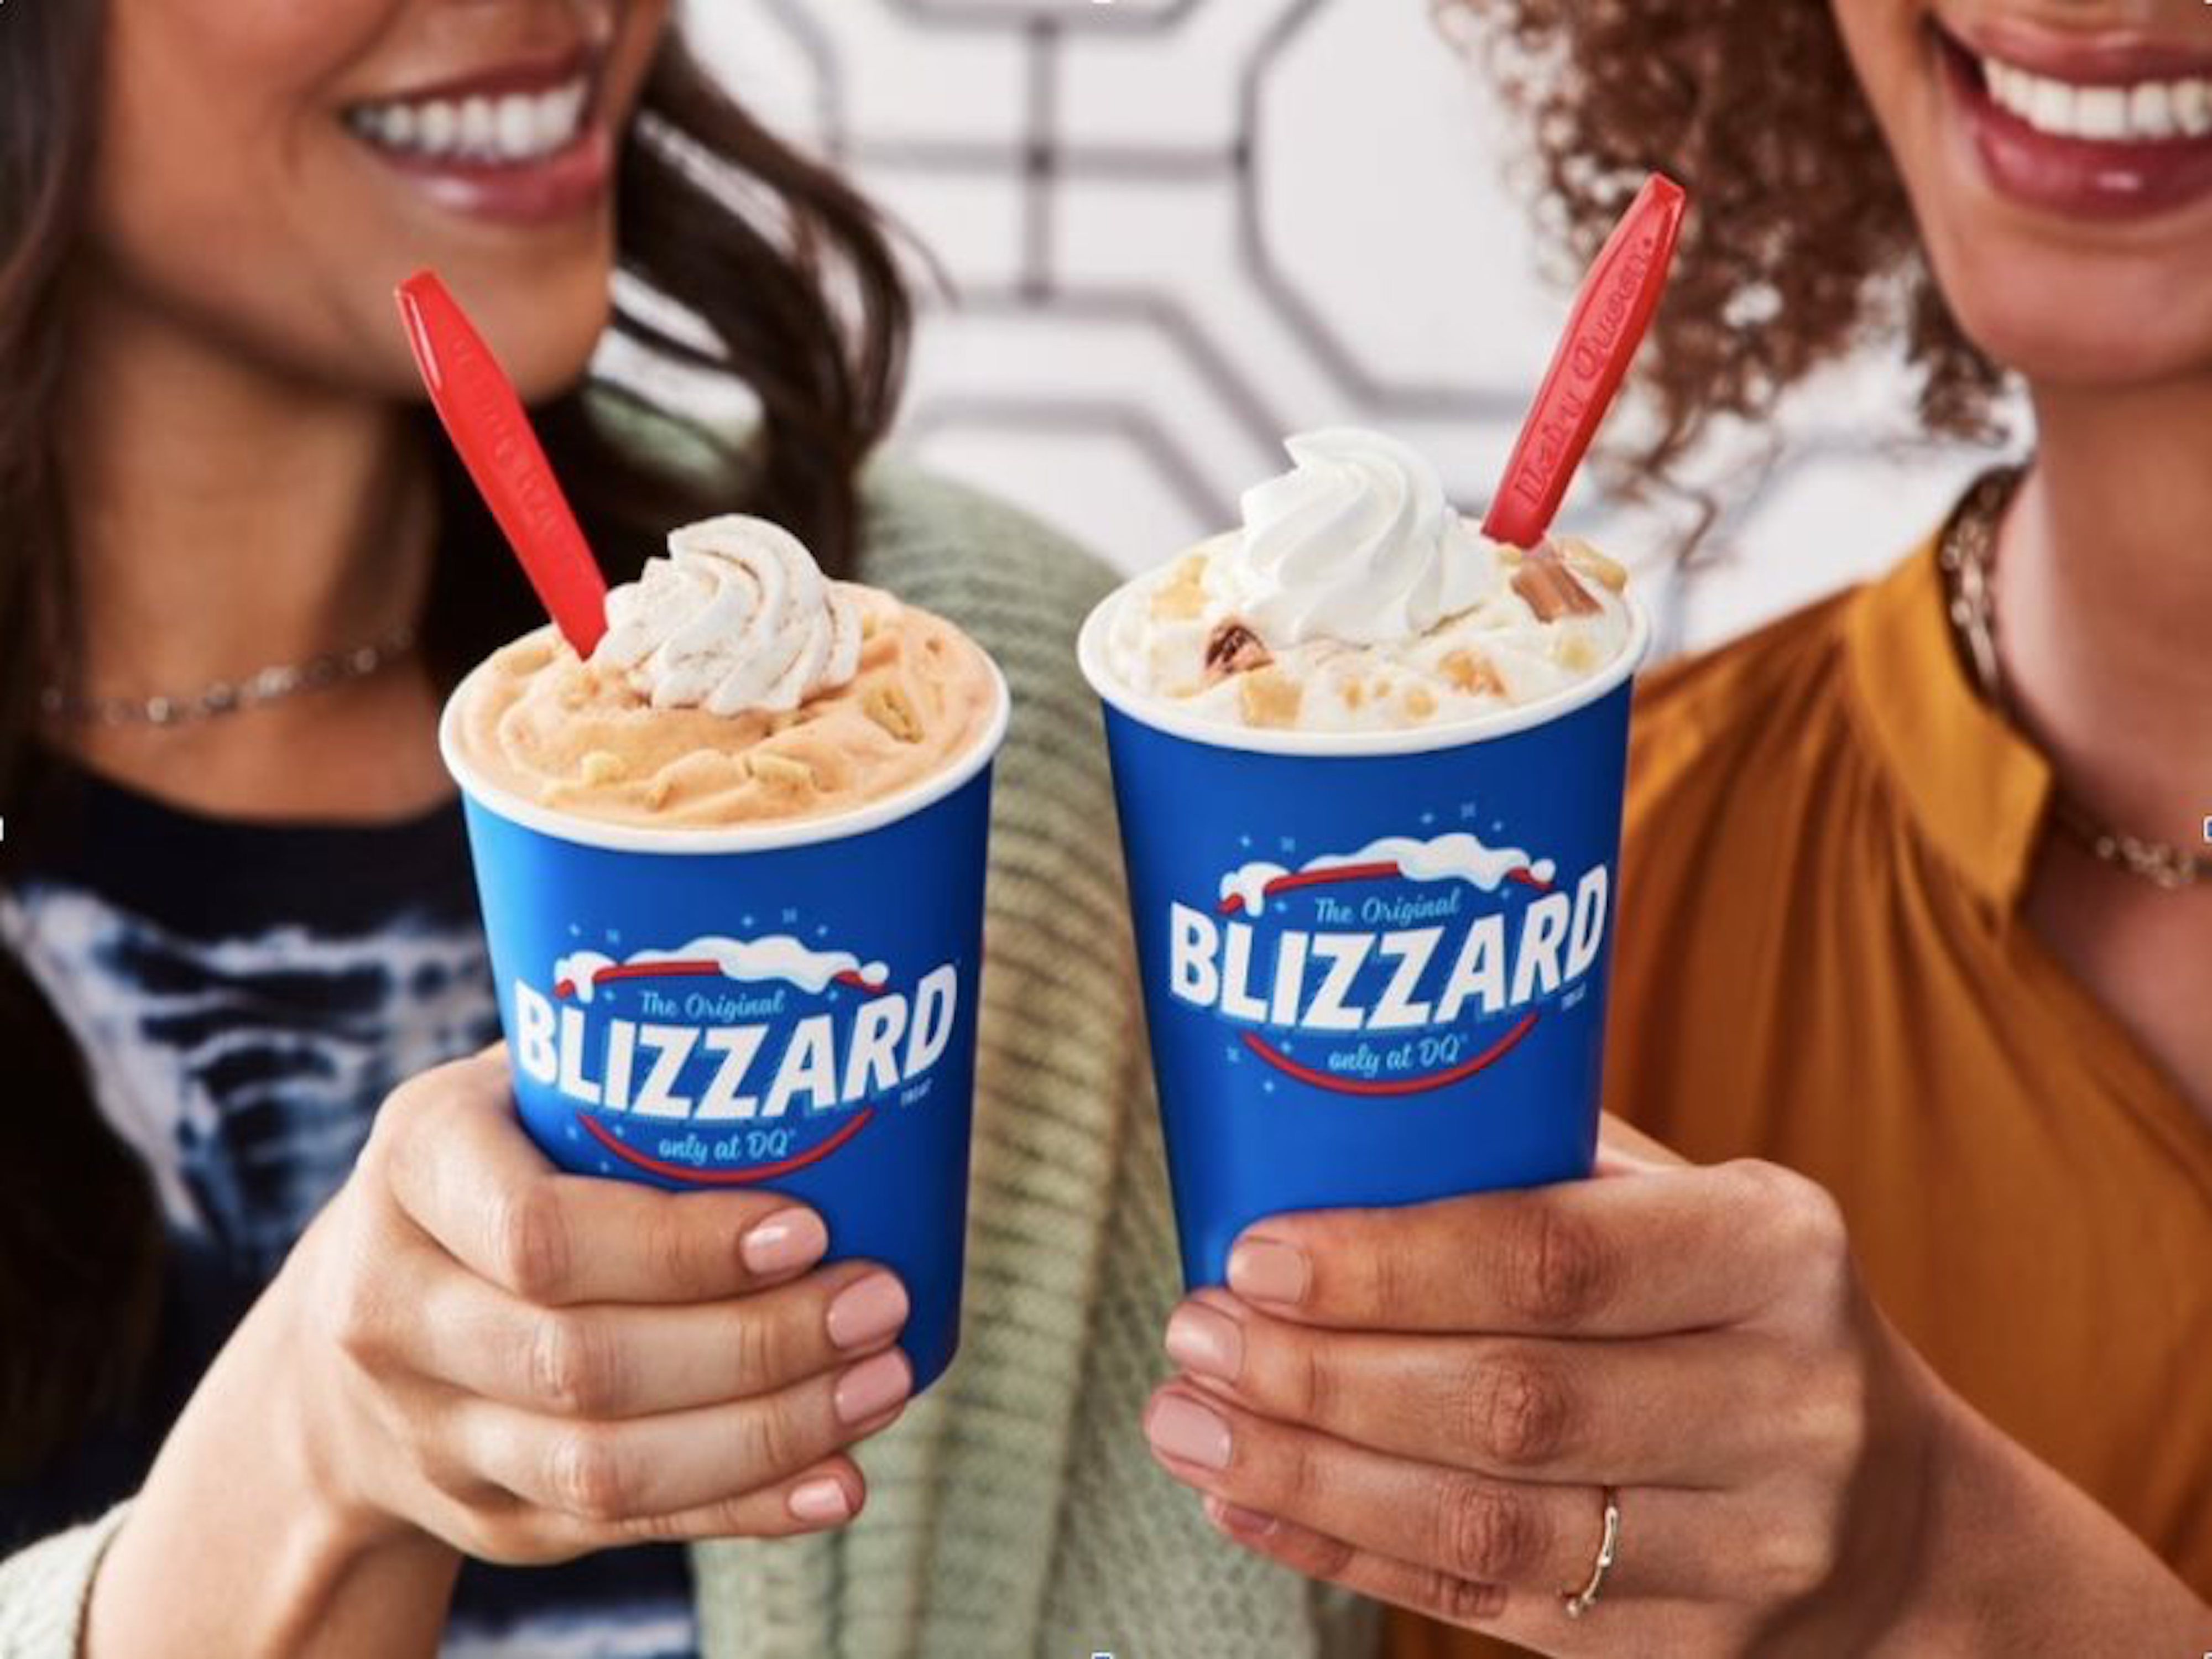 New Fall Blizzard Menu with Pumpkin Pie and Caramel Apple Blizzards